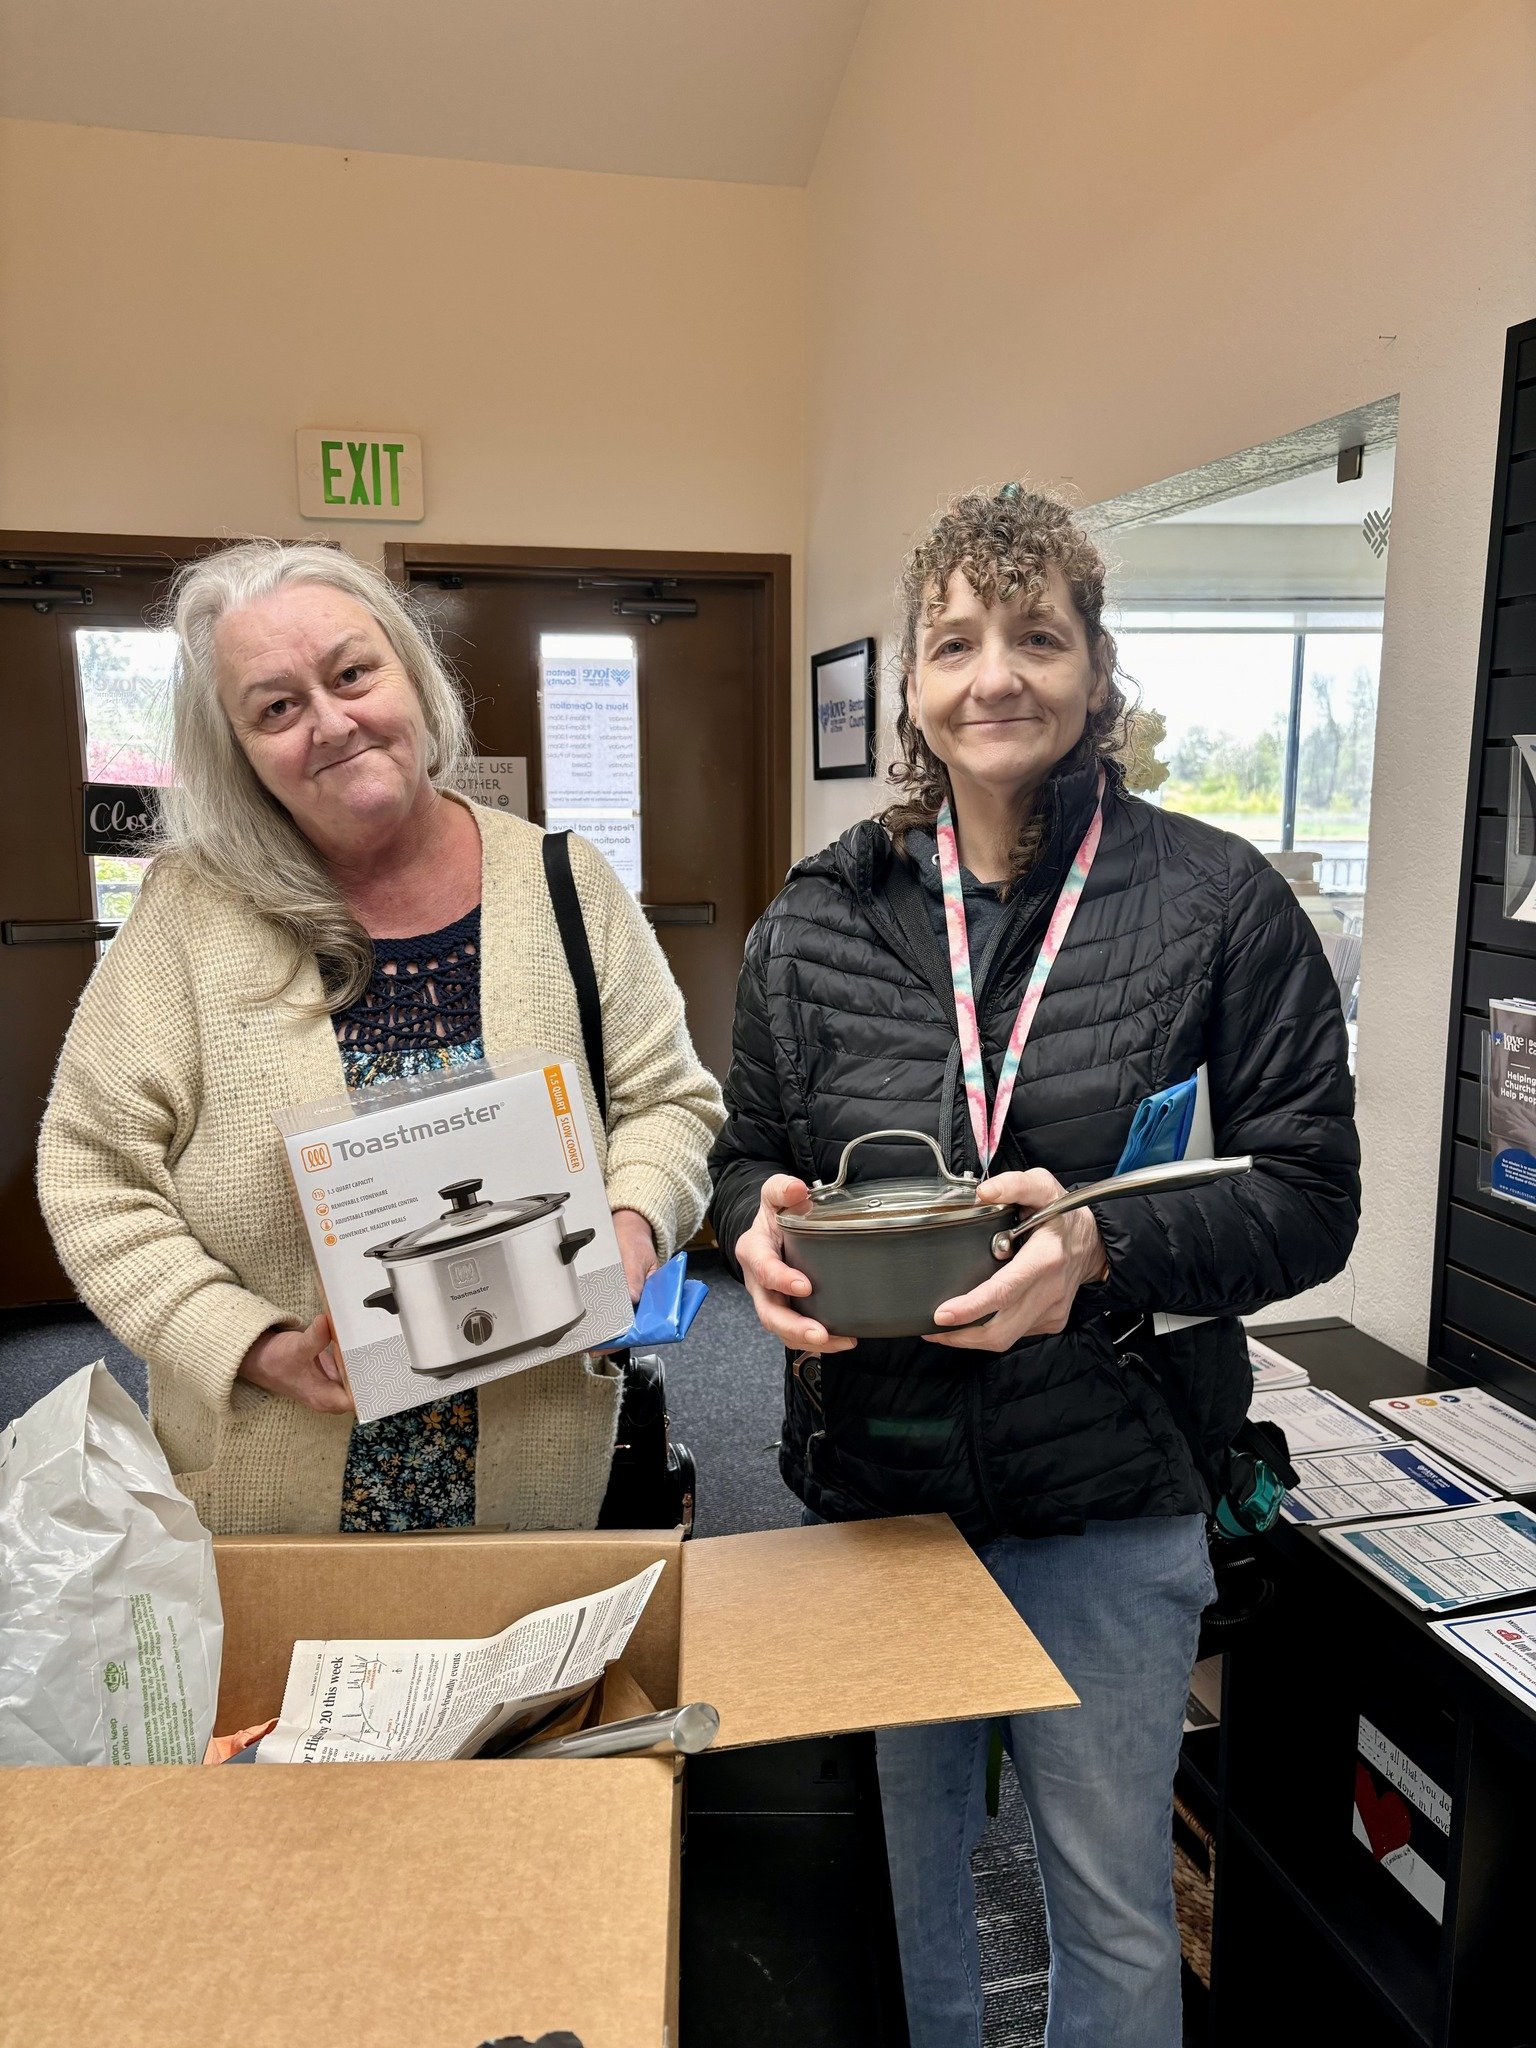 Your donations impact REAL people! One individual (along with her friend) stopped by the Kitchen Closet, housed at @lifecommunitycorvallis, &amp; were so excited for the box of kitchen items to stock her new apartment. She was especially grateful for